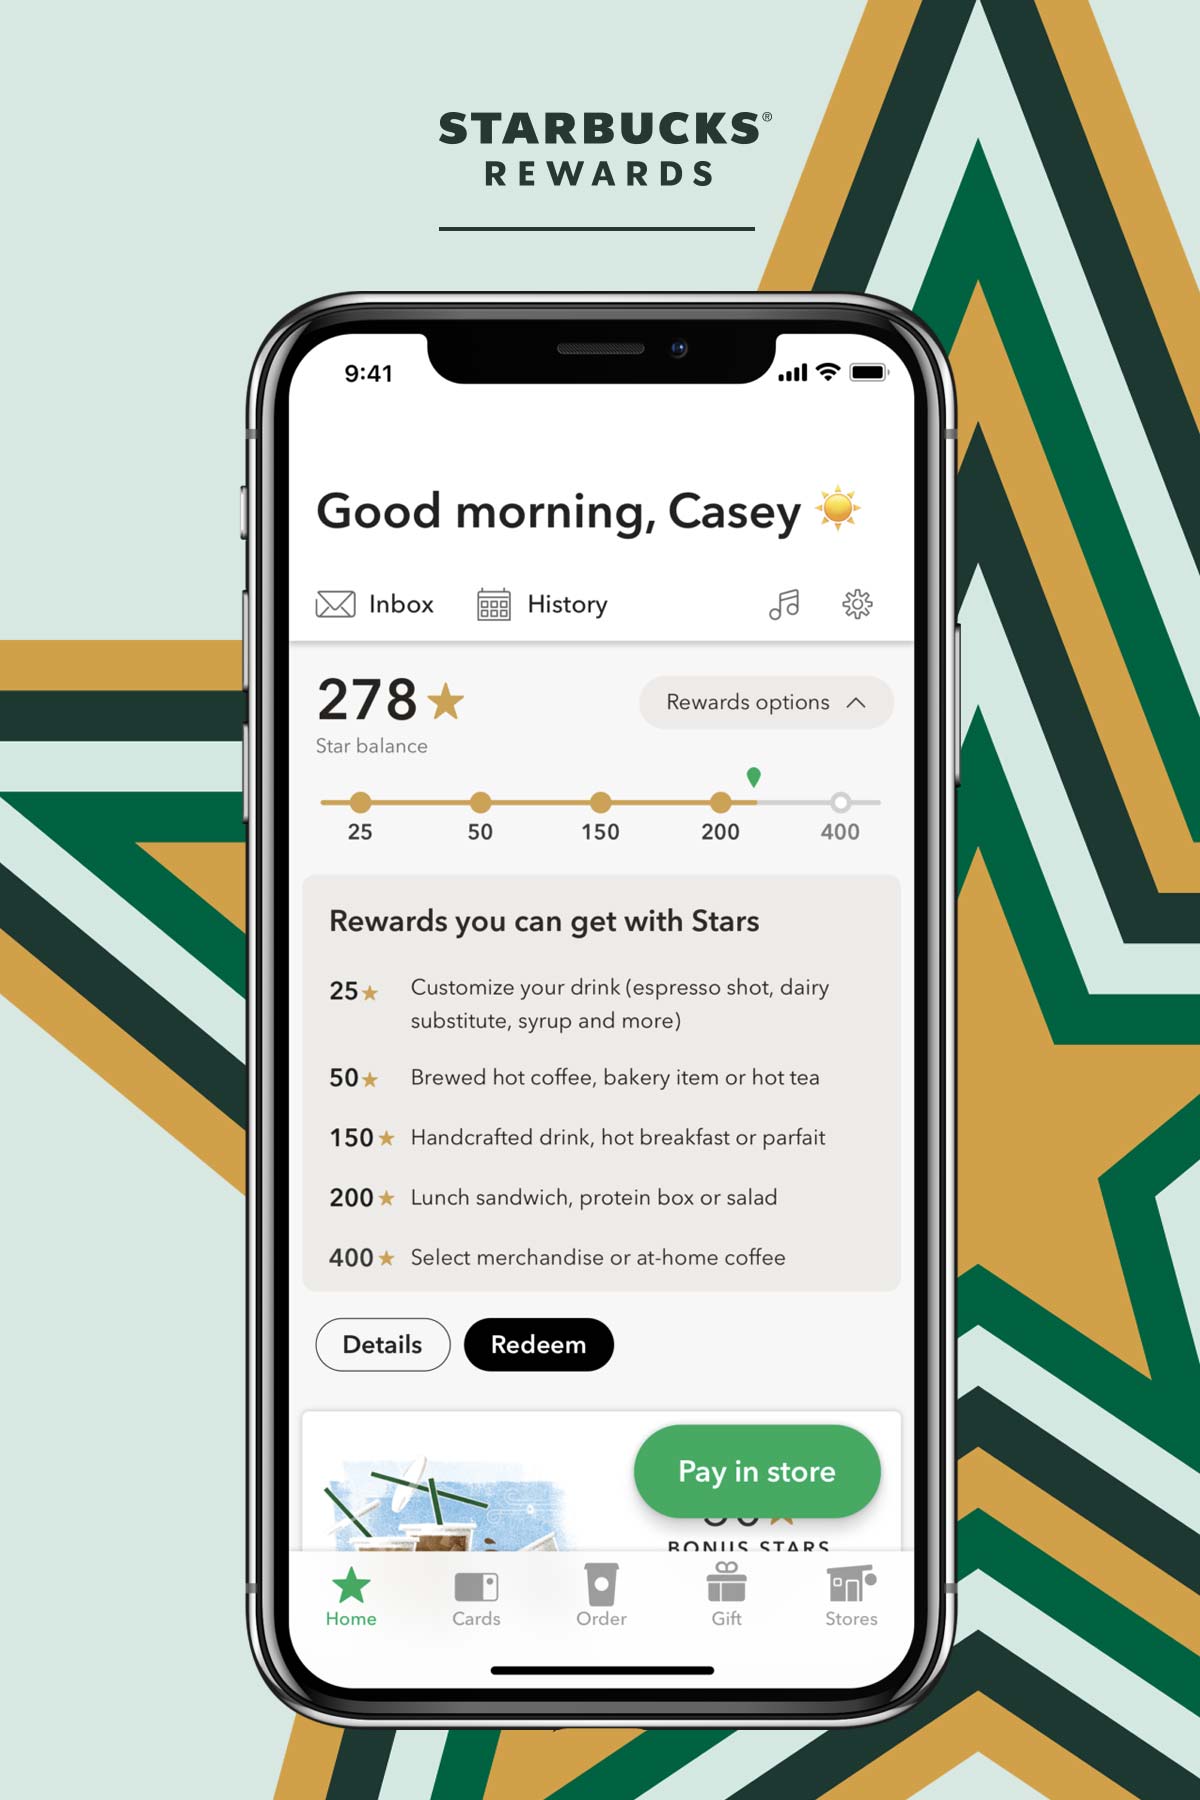 Starbucks rewards graphic with a giant star and iphone.